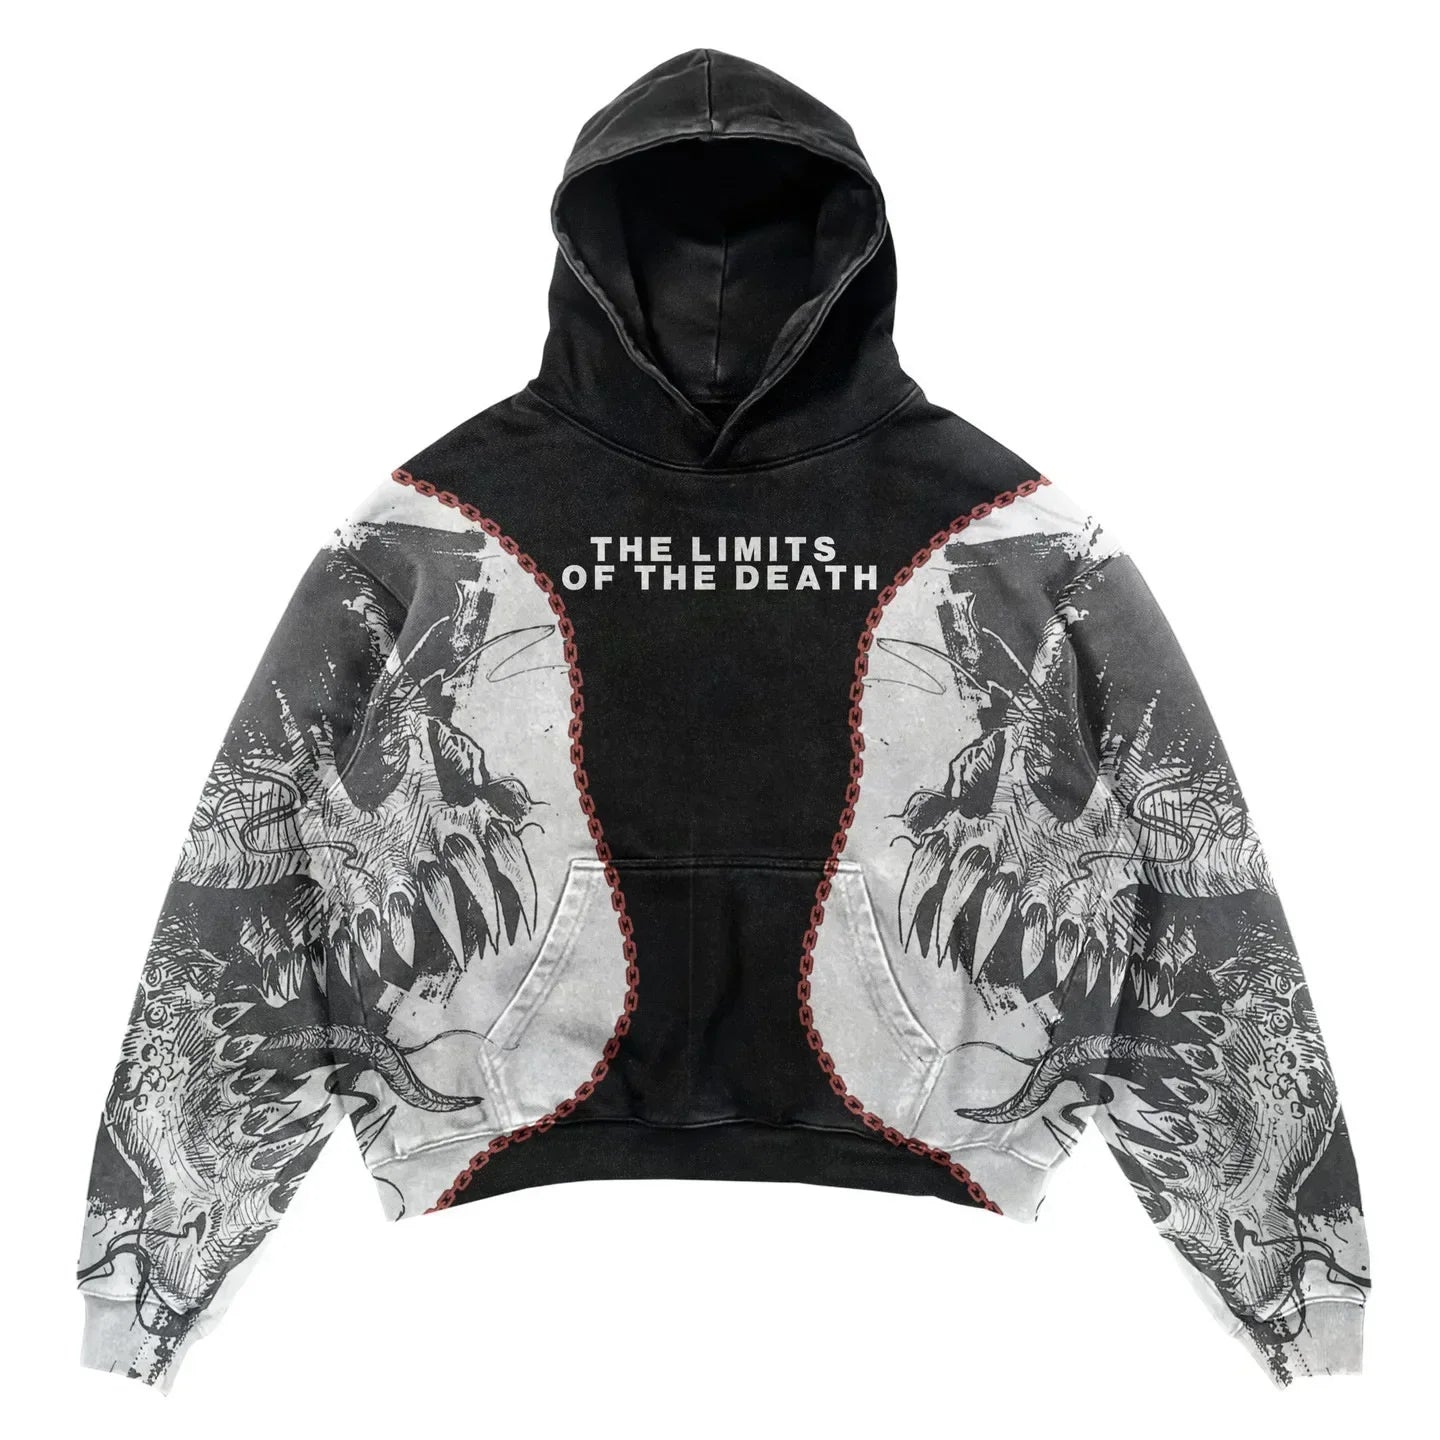 Description: Maramalive™ Explosions Printed Skull Y2K Retro Hooded Sweater Coat Street Style Gothic Casual Fashion Hooded Sweater Men's Female. A black hoodie with the text "THE LIMITS OF THE DEATH" on the chest. This punk style piece features detailed graphics of monstrous faces with open mouths exposing sharp teeth on the back and sleeves, making it a standout in men's fashion.